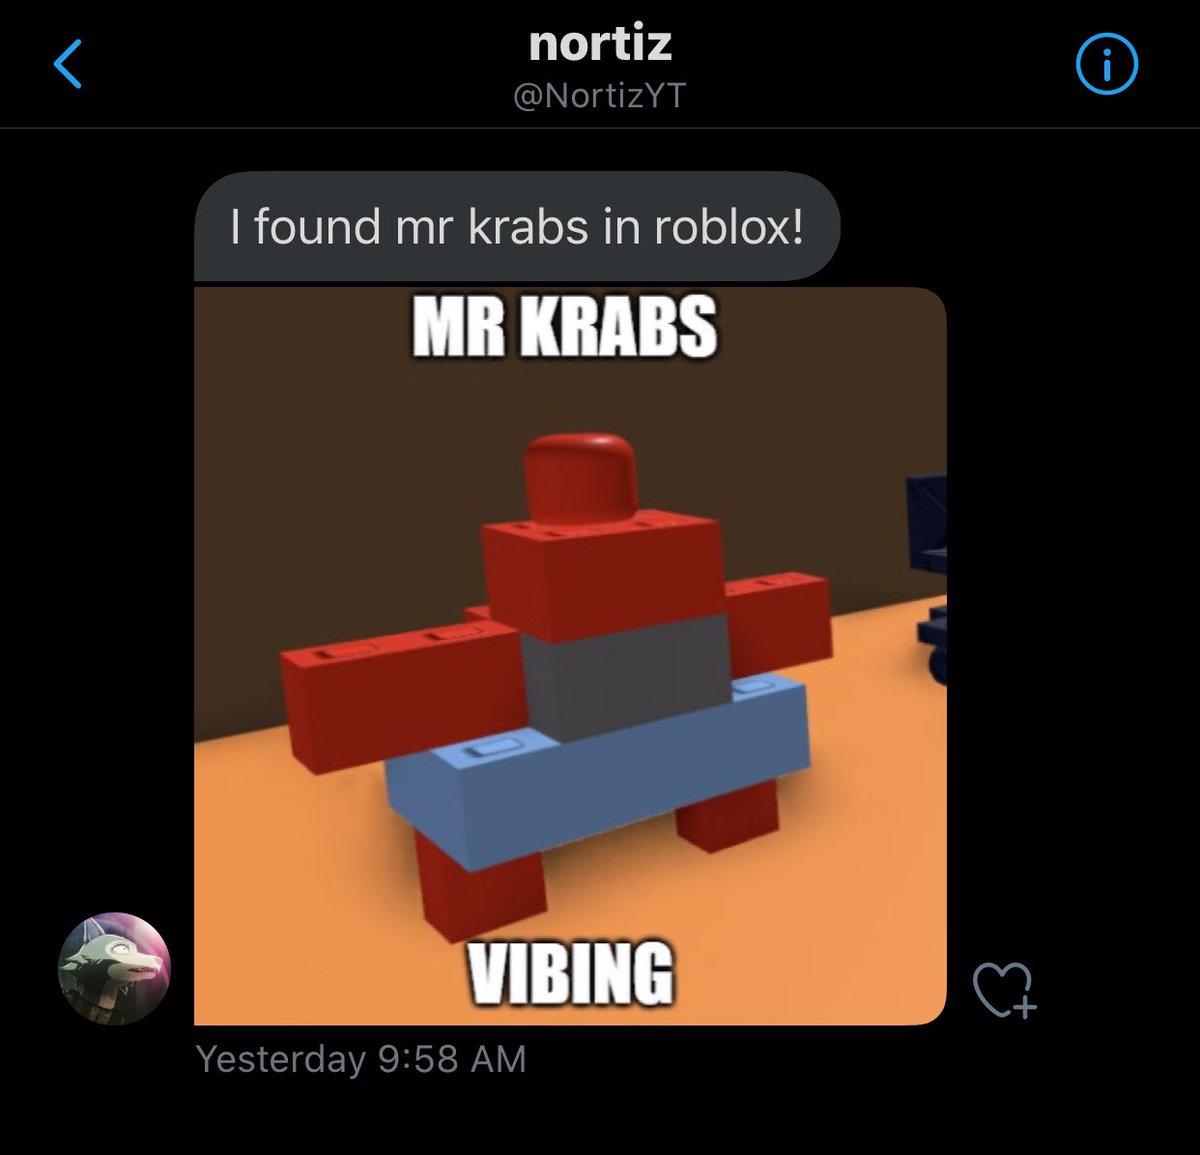 News Roblox On Twitter Mr Crabs Has Been Spotted In A Roblox - mr crabs roblox